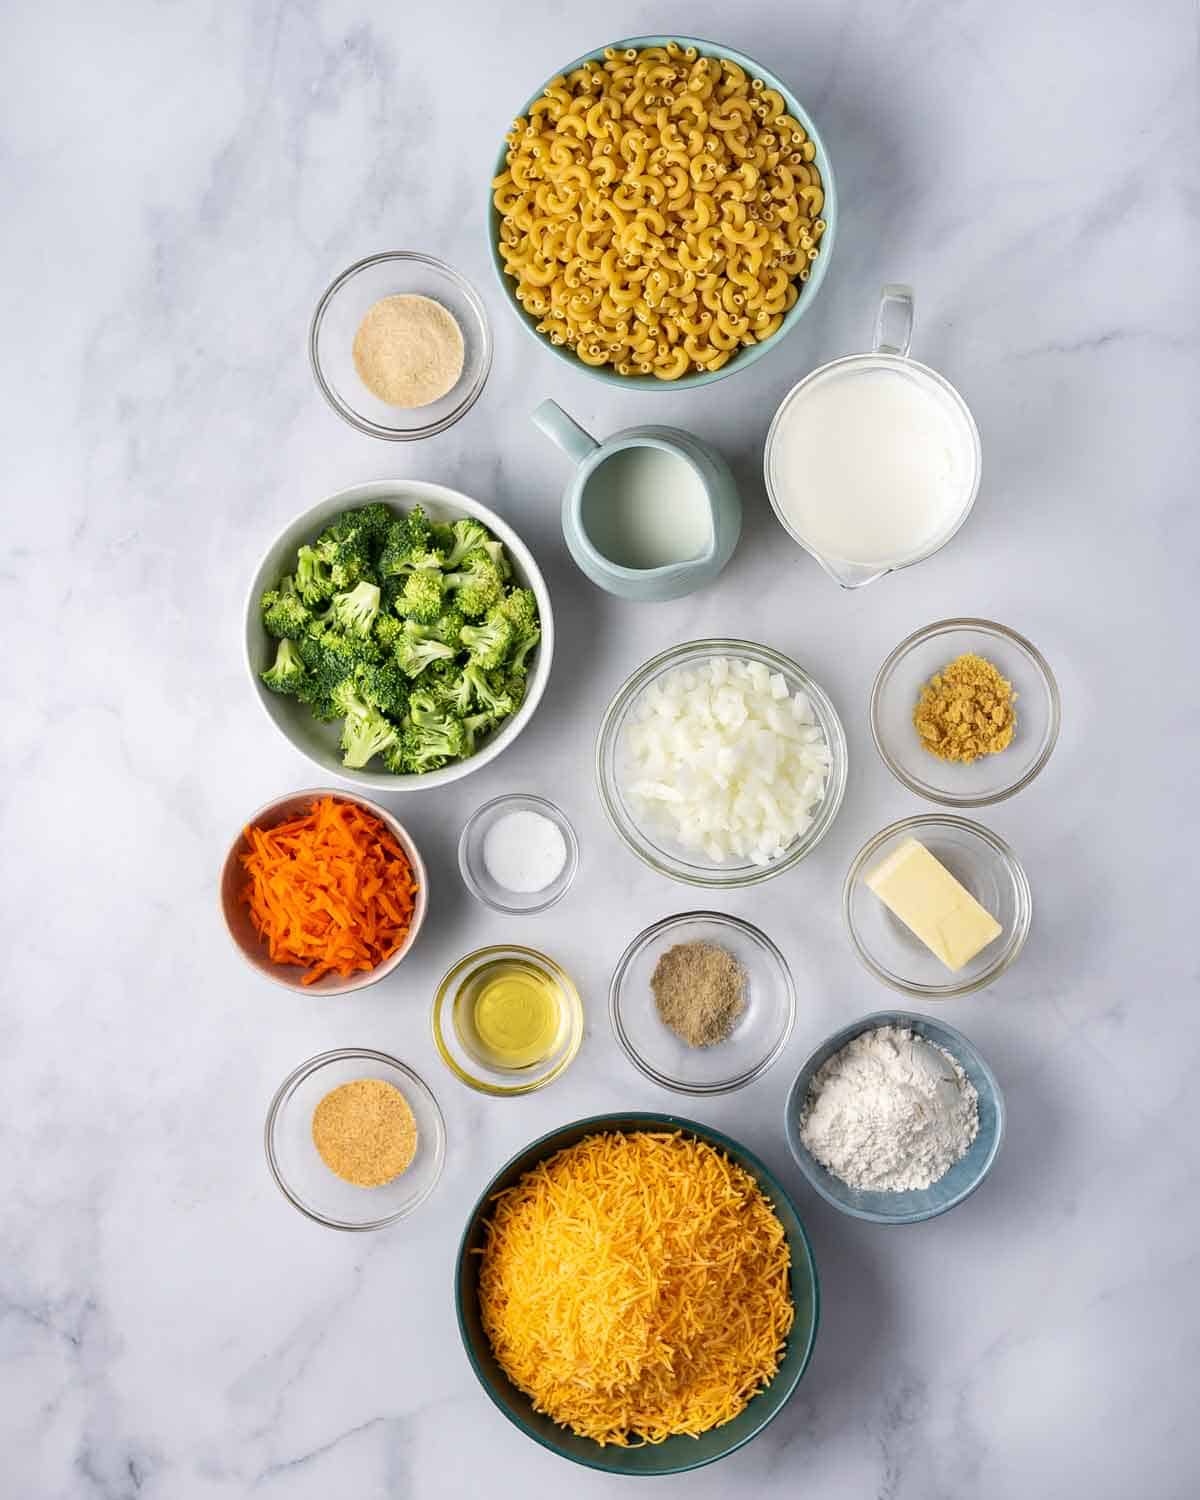 Ingredients needed to make copycat panera broccoli cheddar mac and cheese.